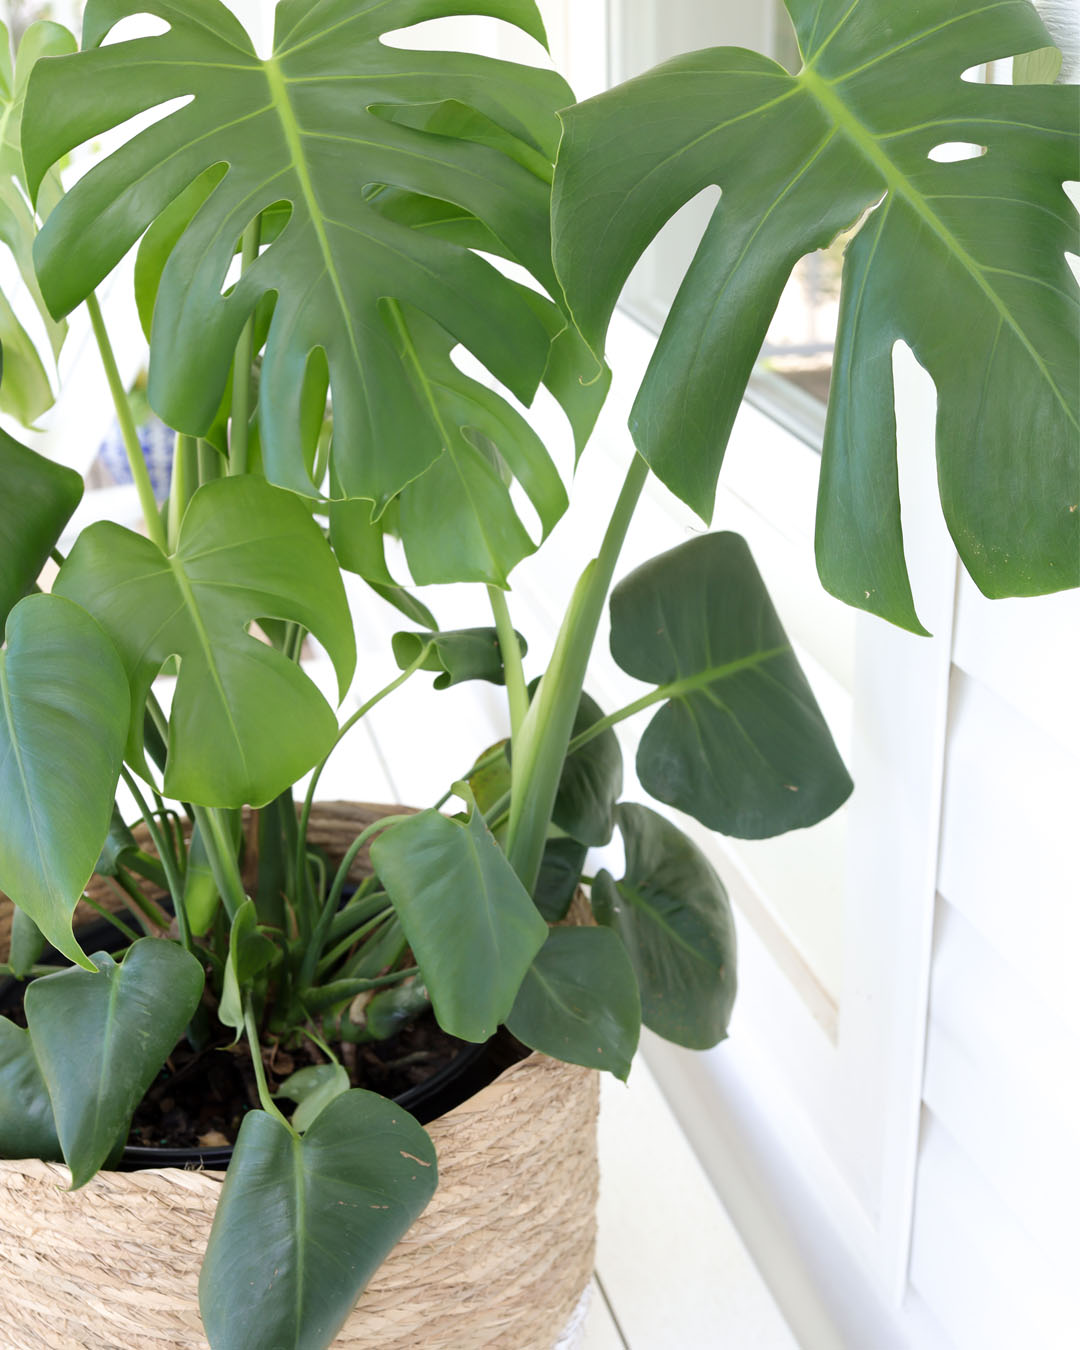 You may have heard that it's really easy to propagate monstera plants, but there's a little trick to it that will make all the difference in how successful you are!